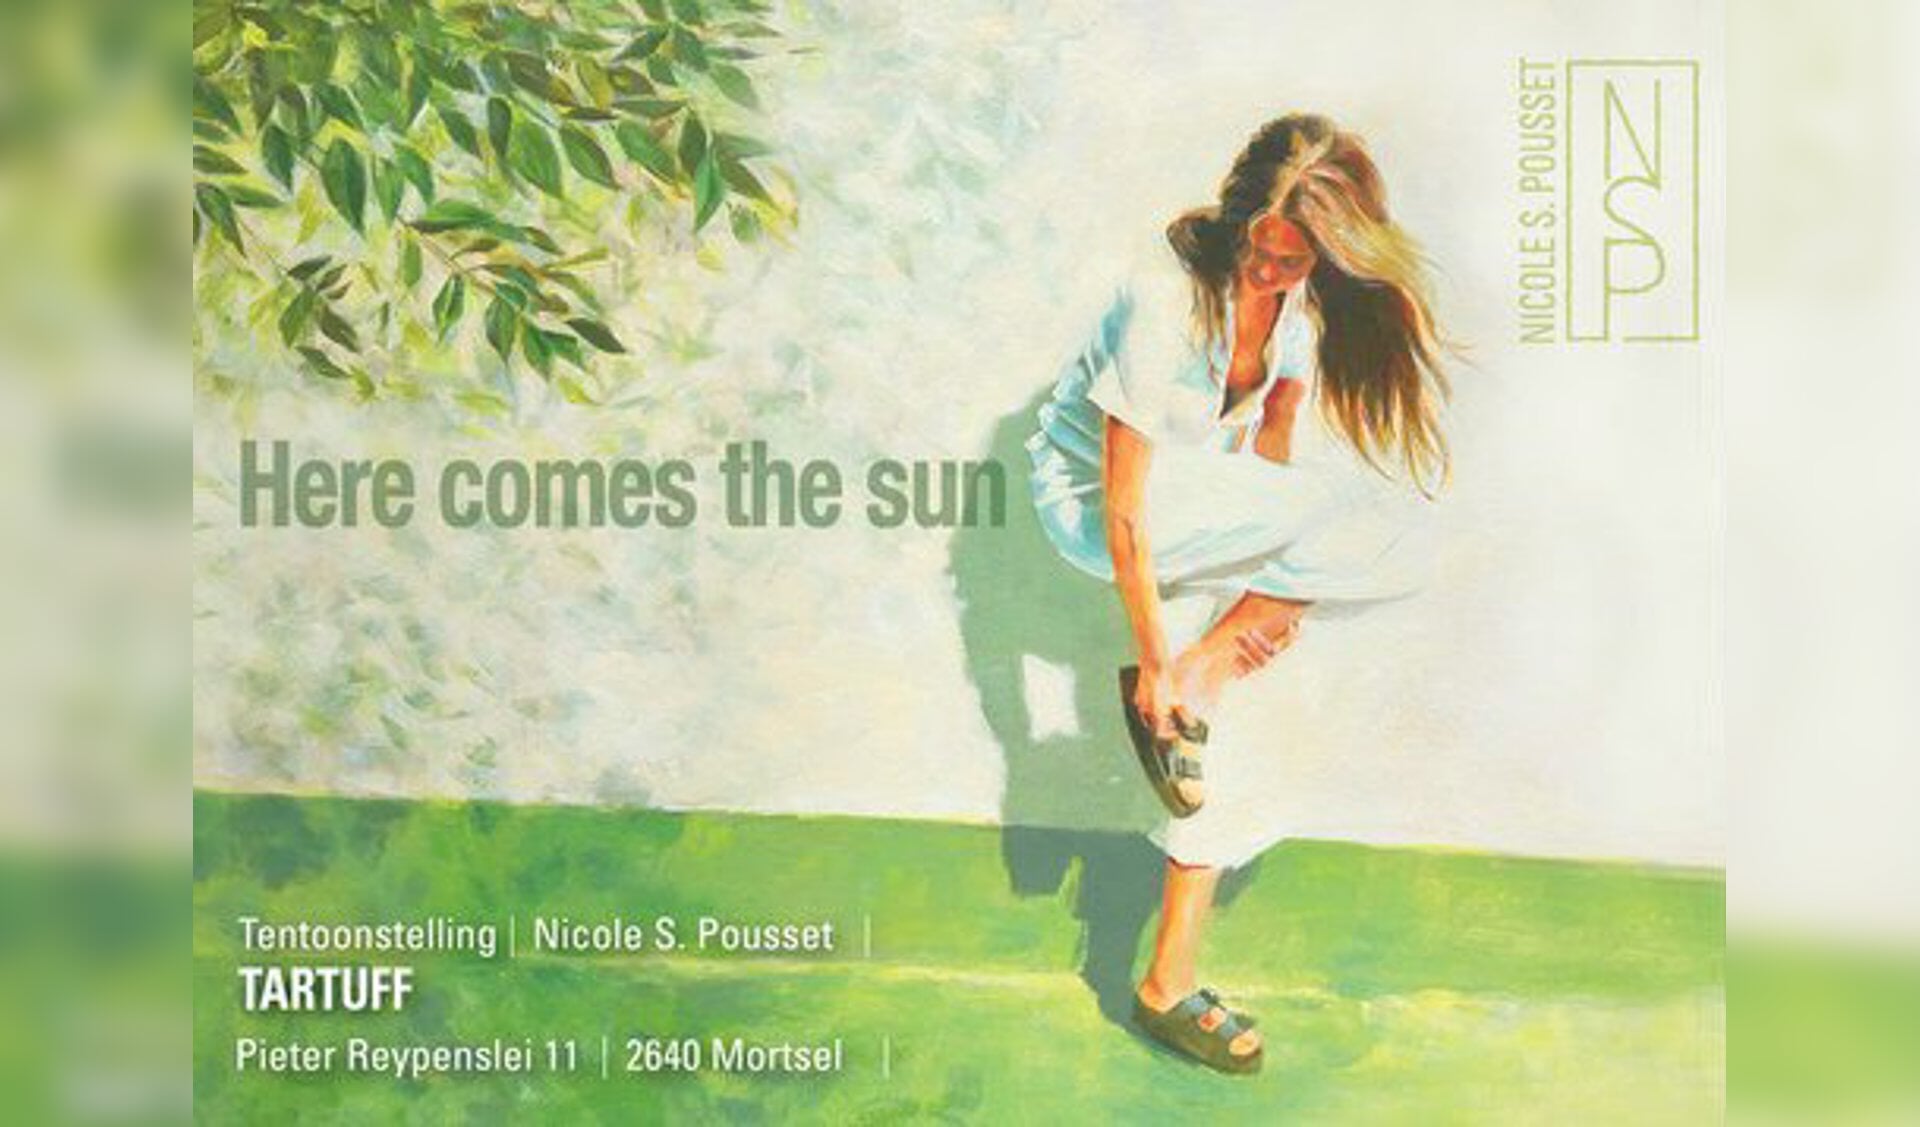 Tentoonstelling ‘Here comes the sun’ cover